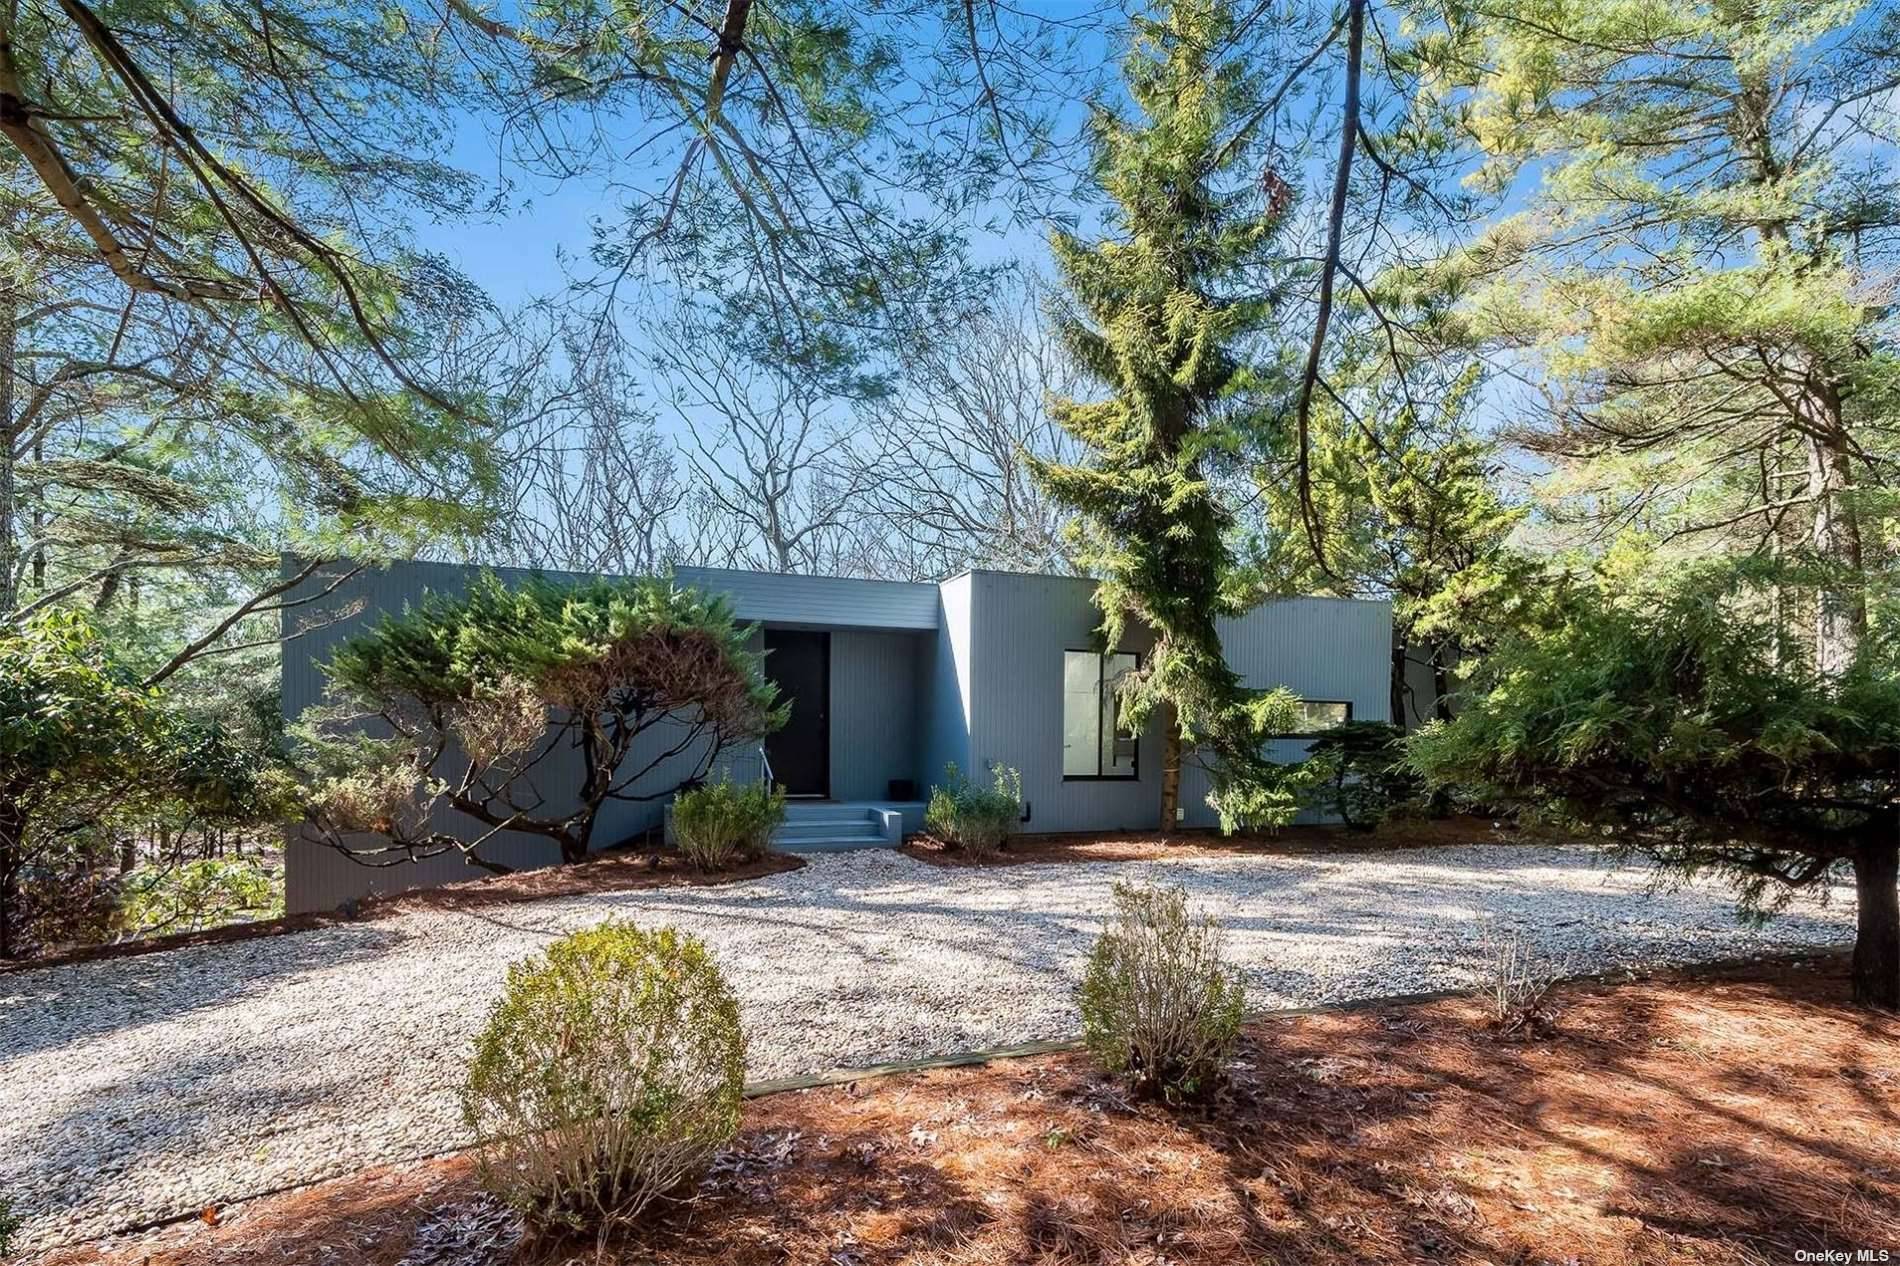 Recently updated and new to the rental market, this bright modern residence is secluded on 3.